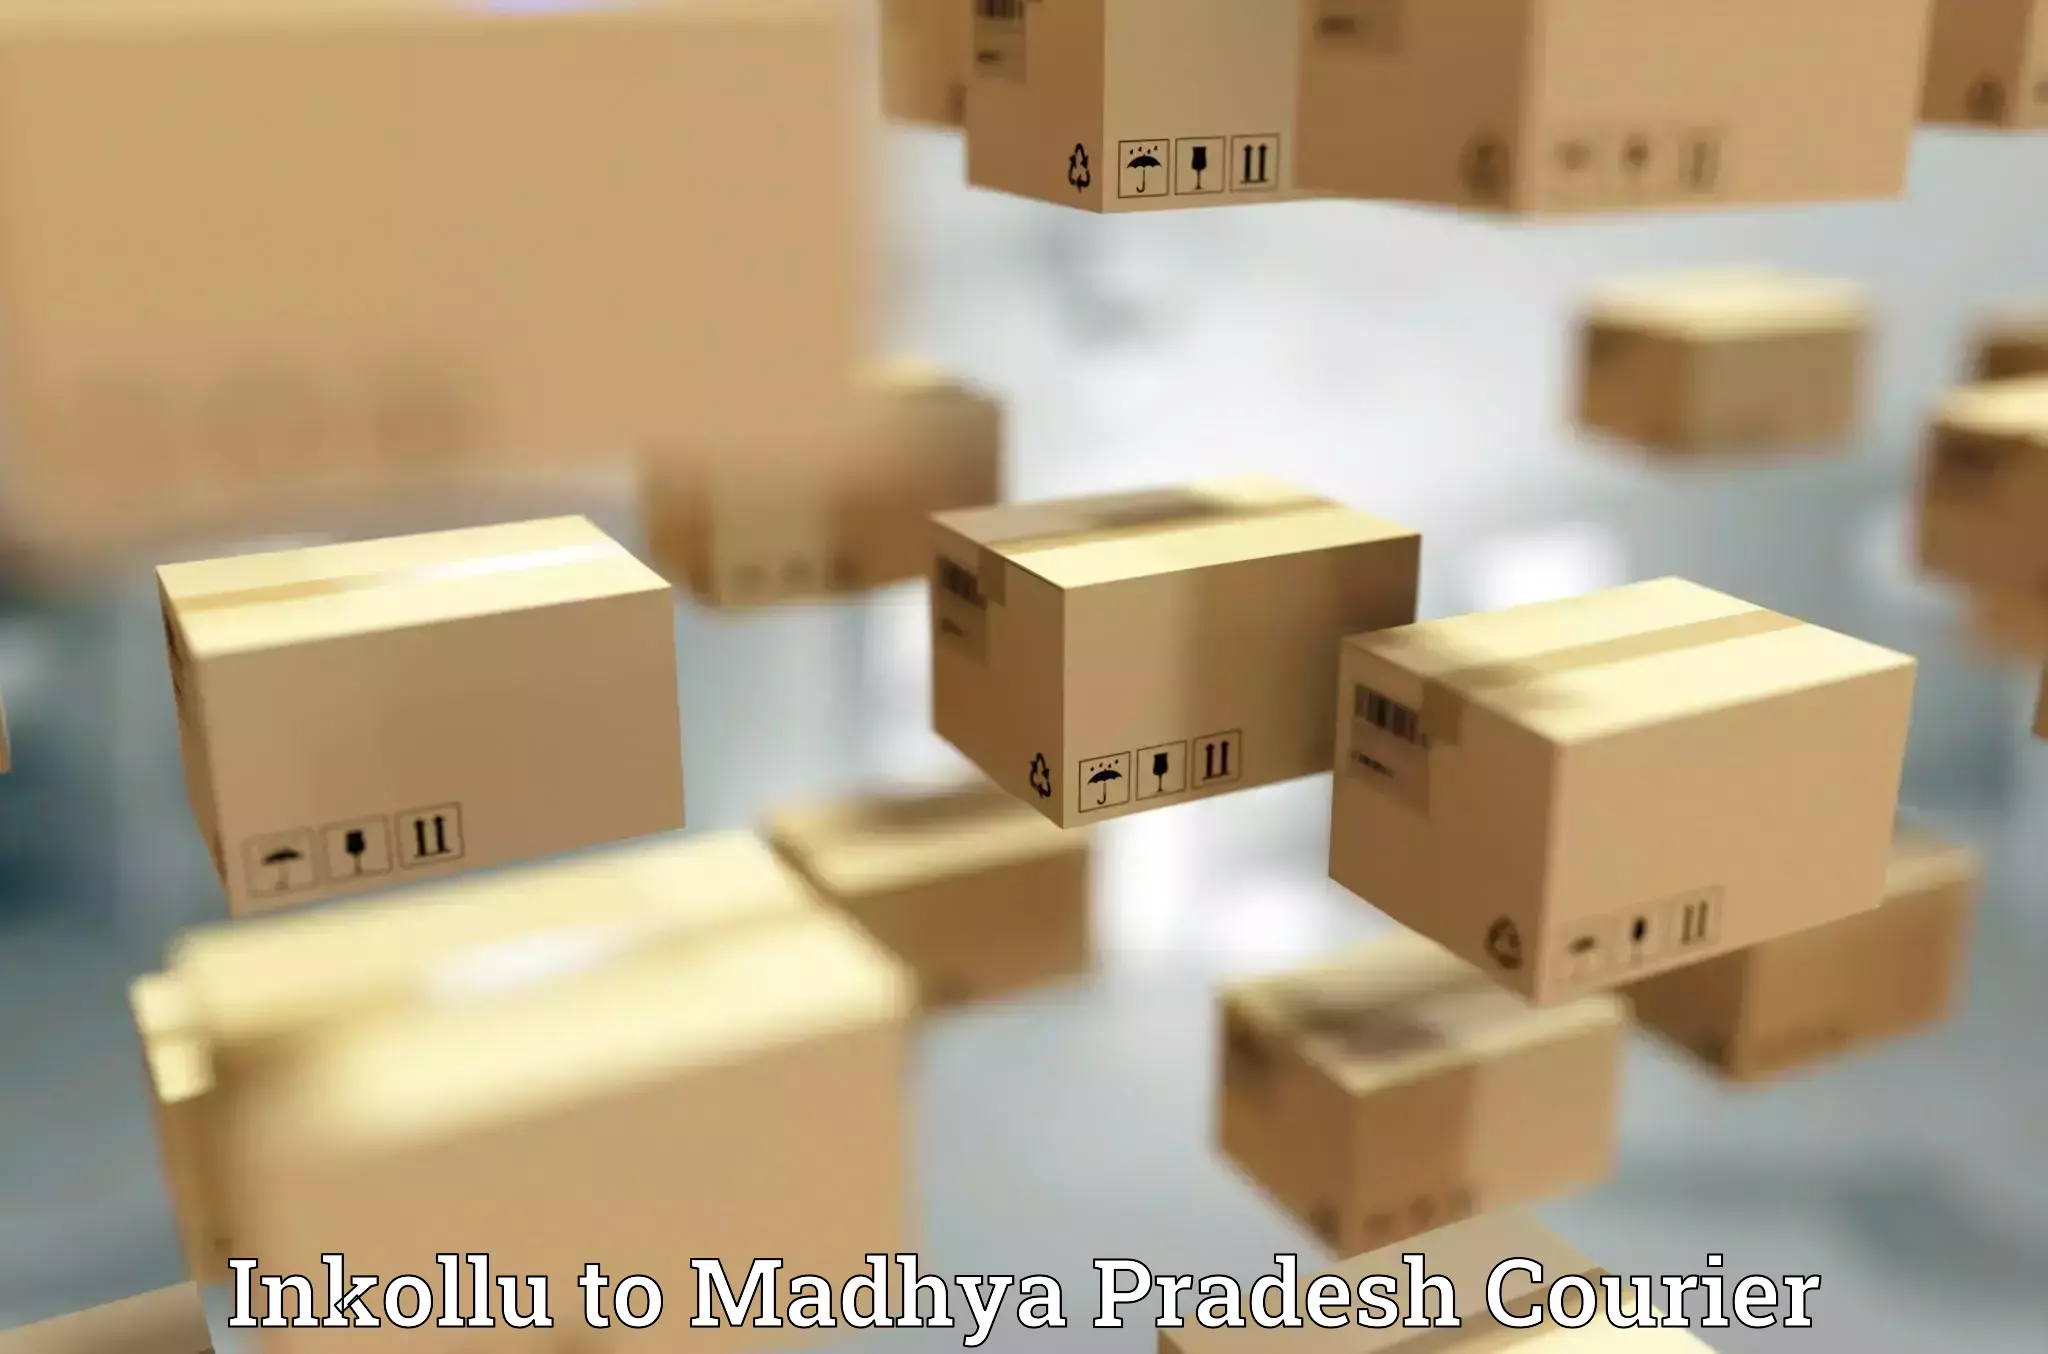 24-hour courier service Inkollu to Nagod